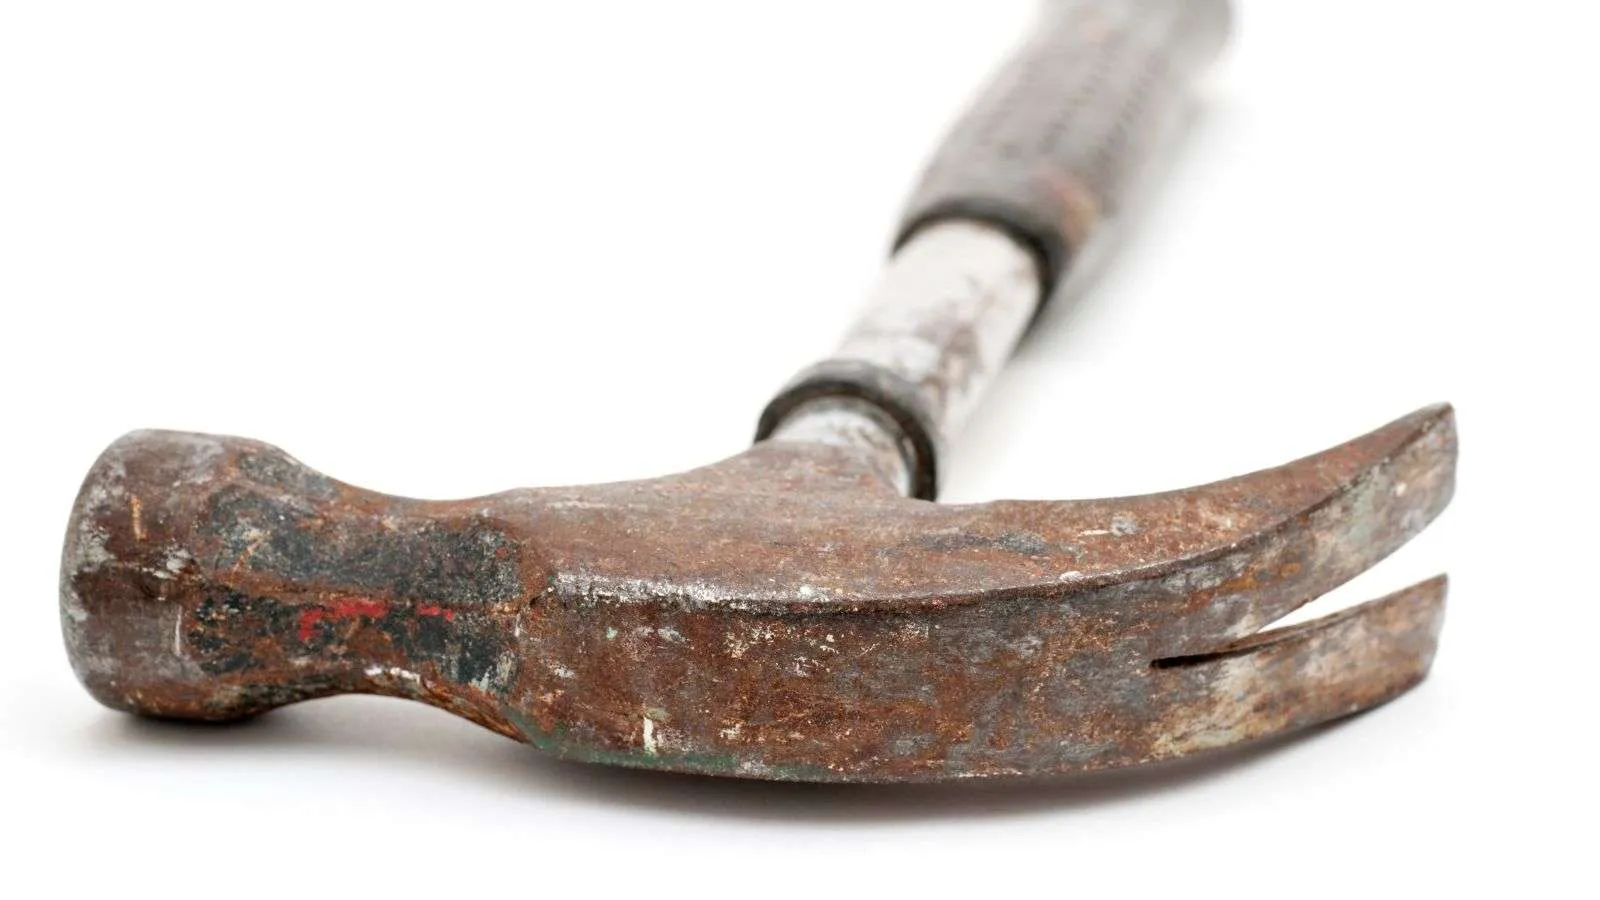 safety consideration for rusty hammer - bighomeprojects.com